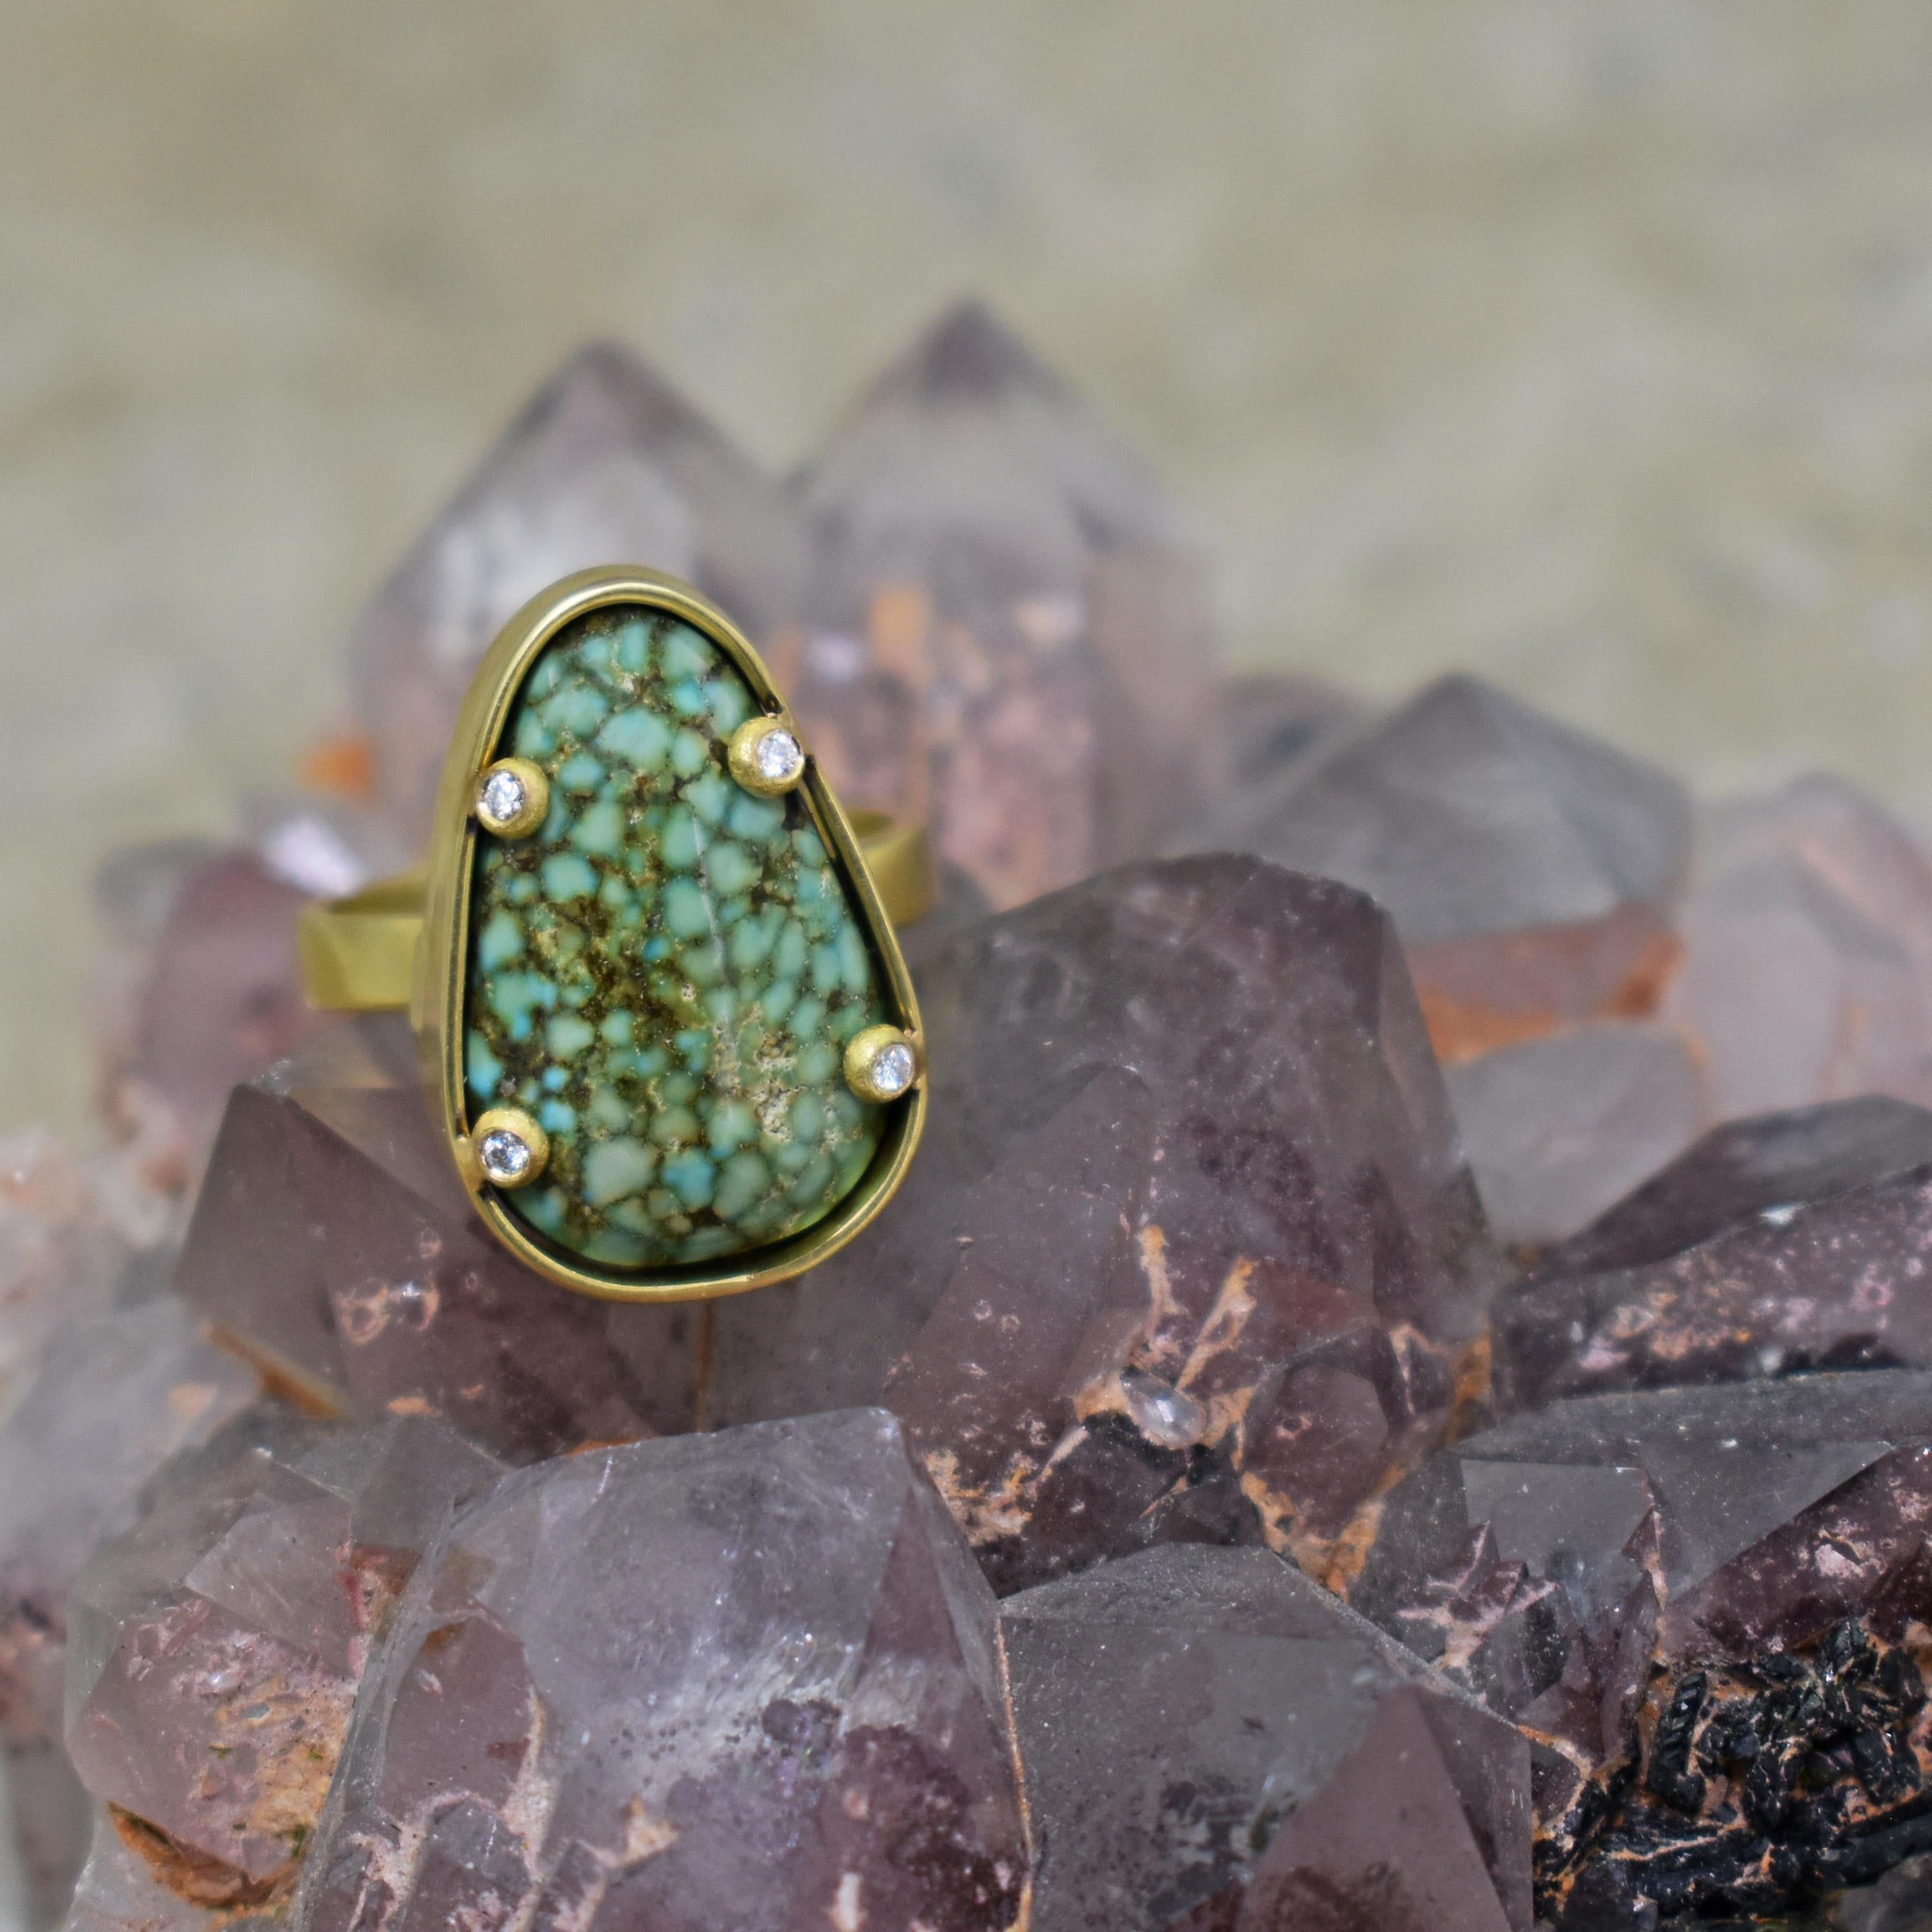 10 carat Turquoise Mountain cabochon with accent white Diamonds 18k yellow gold cocktail ring. Ring band is 3mm wide and ring is size 6. Gorgeous Turquoise gemstone with beautiful color and matrix in this contemporary, handmade ring. 